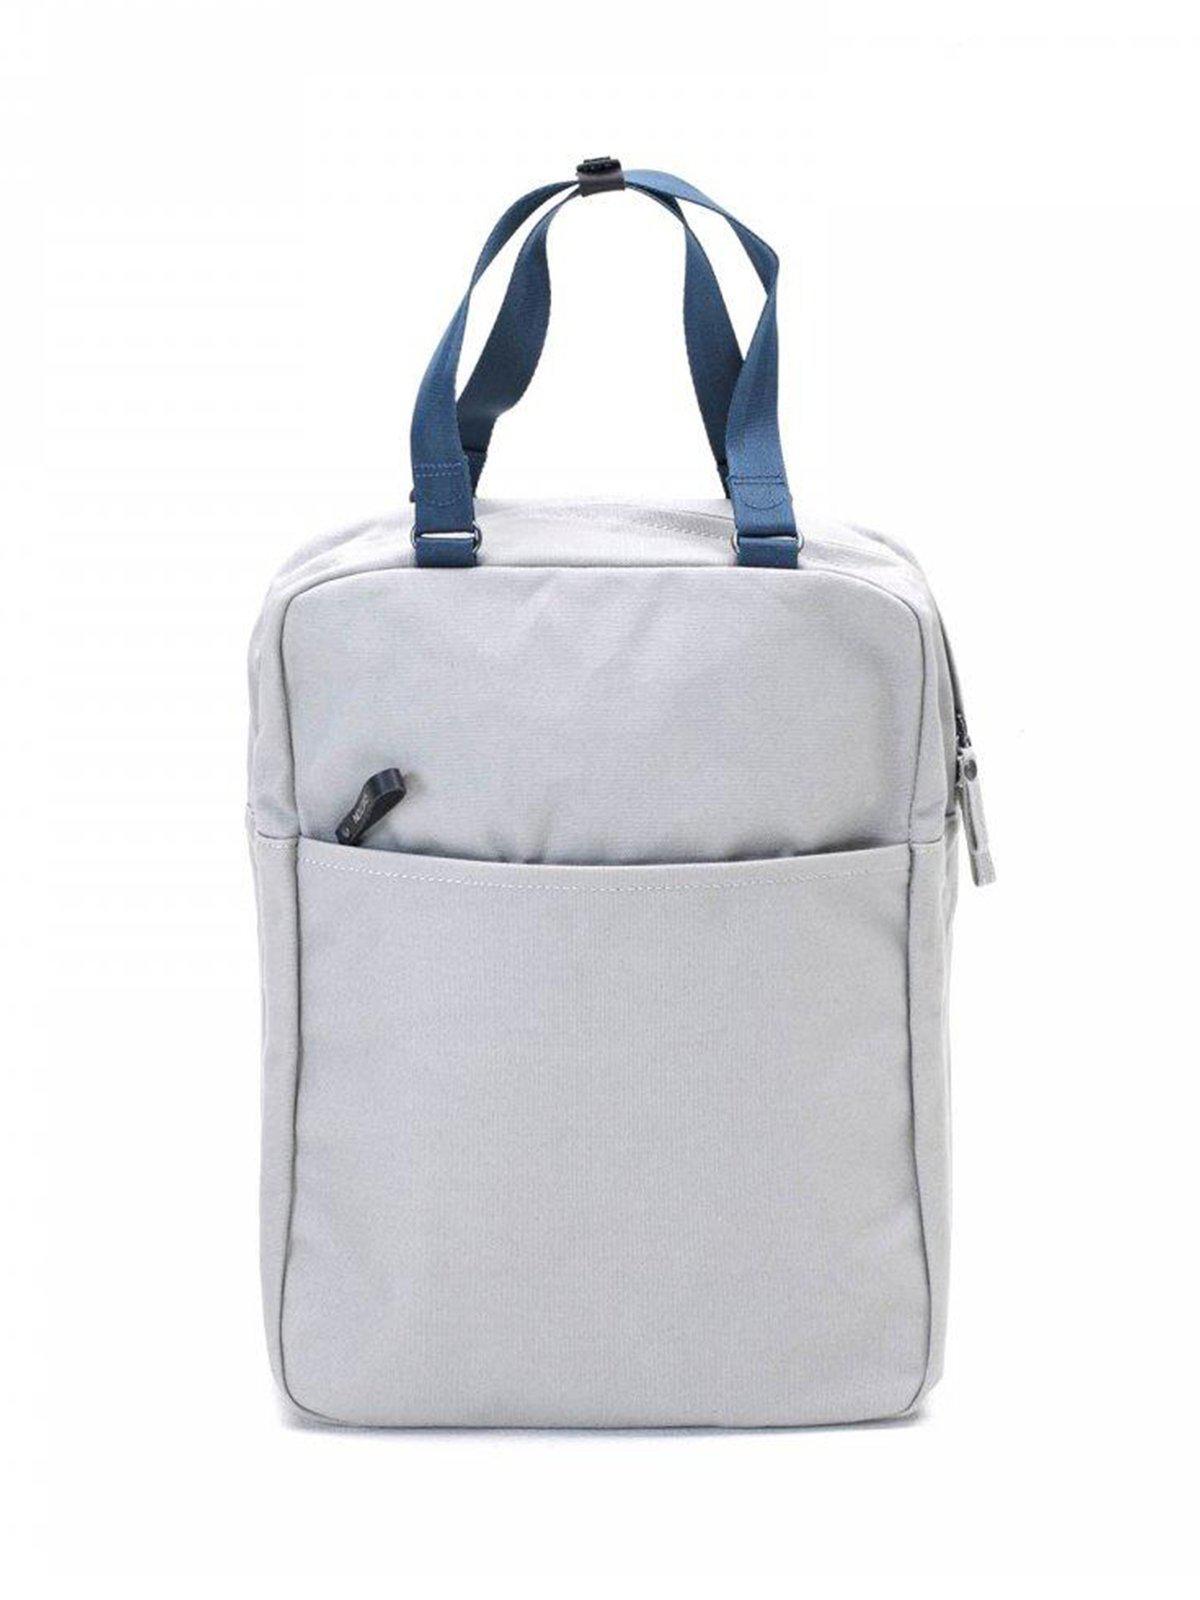 Qwstion Simple Pack Organic Light Grey - MORE by Morello Indonesia